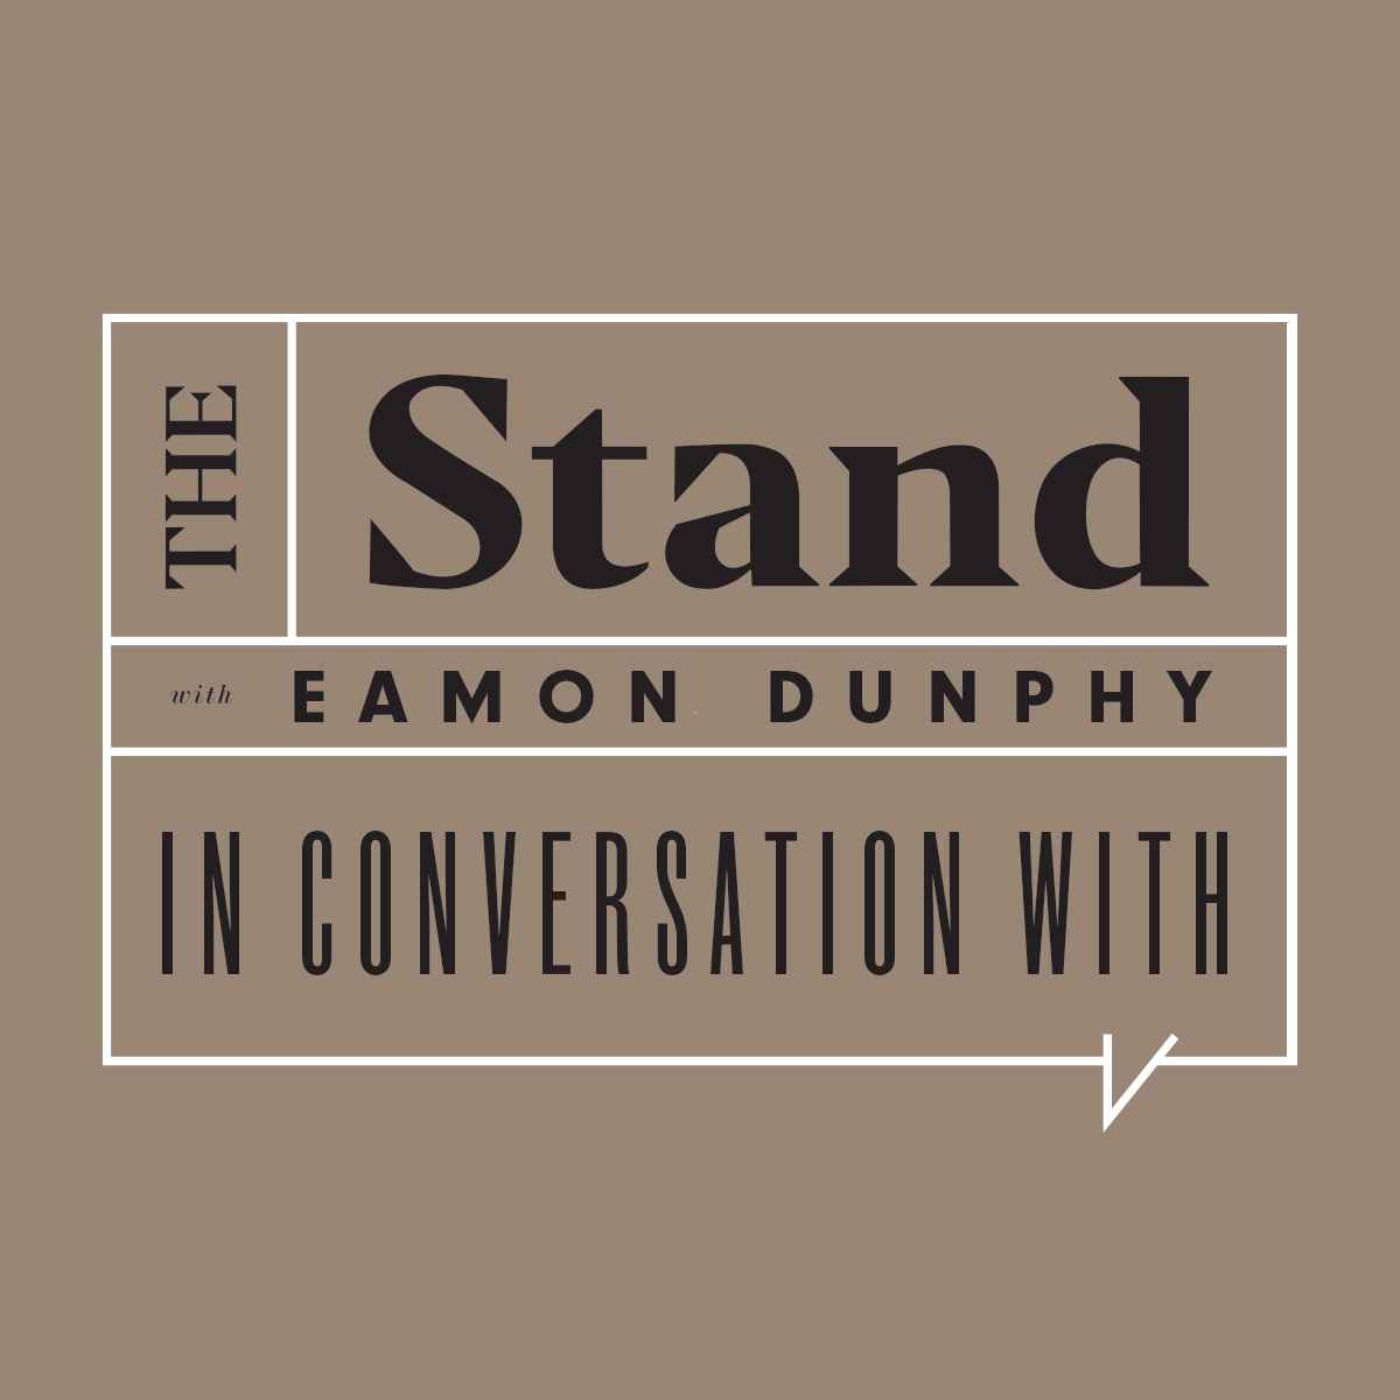 Ep 1939: As Europe and the US turn right politically  why Ireland rejects extremism